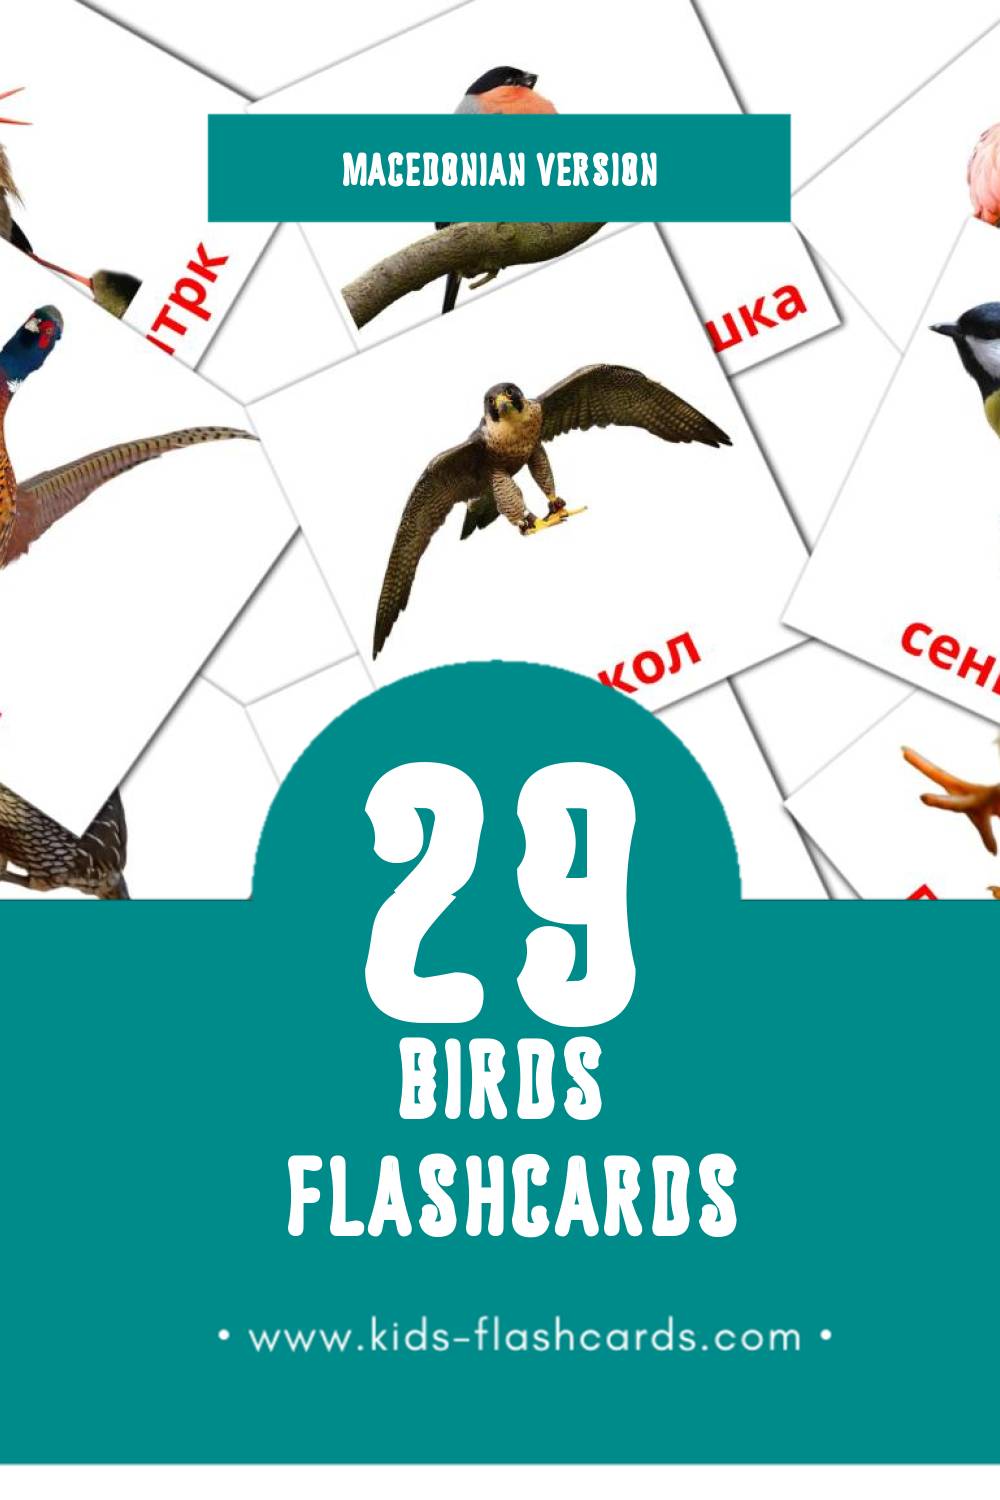 Visual Птици  Flashcards for Toddlers (29 cards in Macedonian)